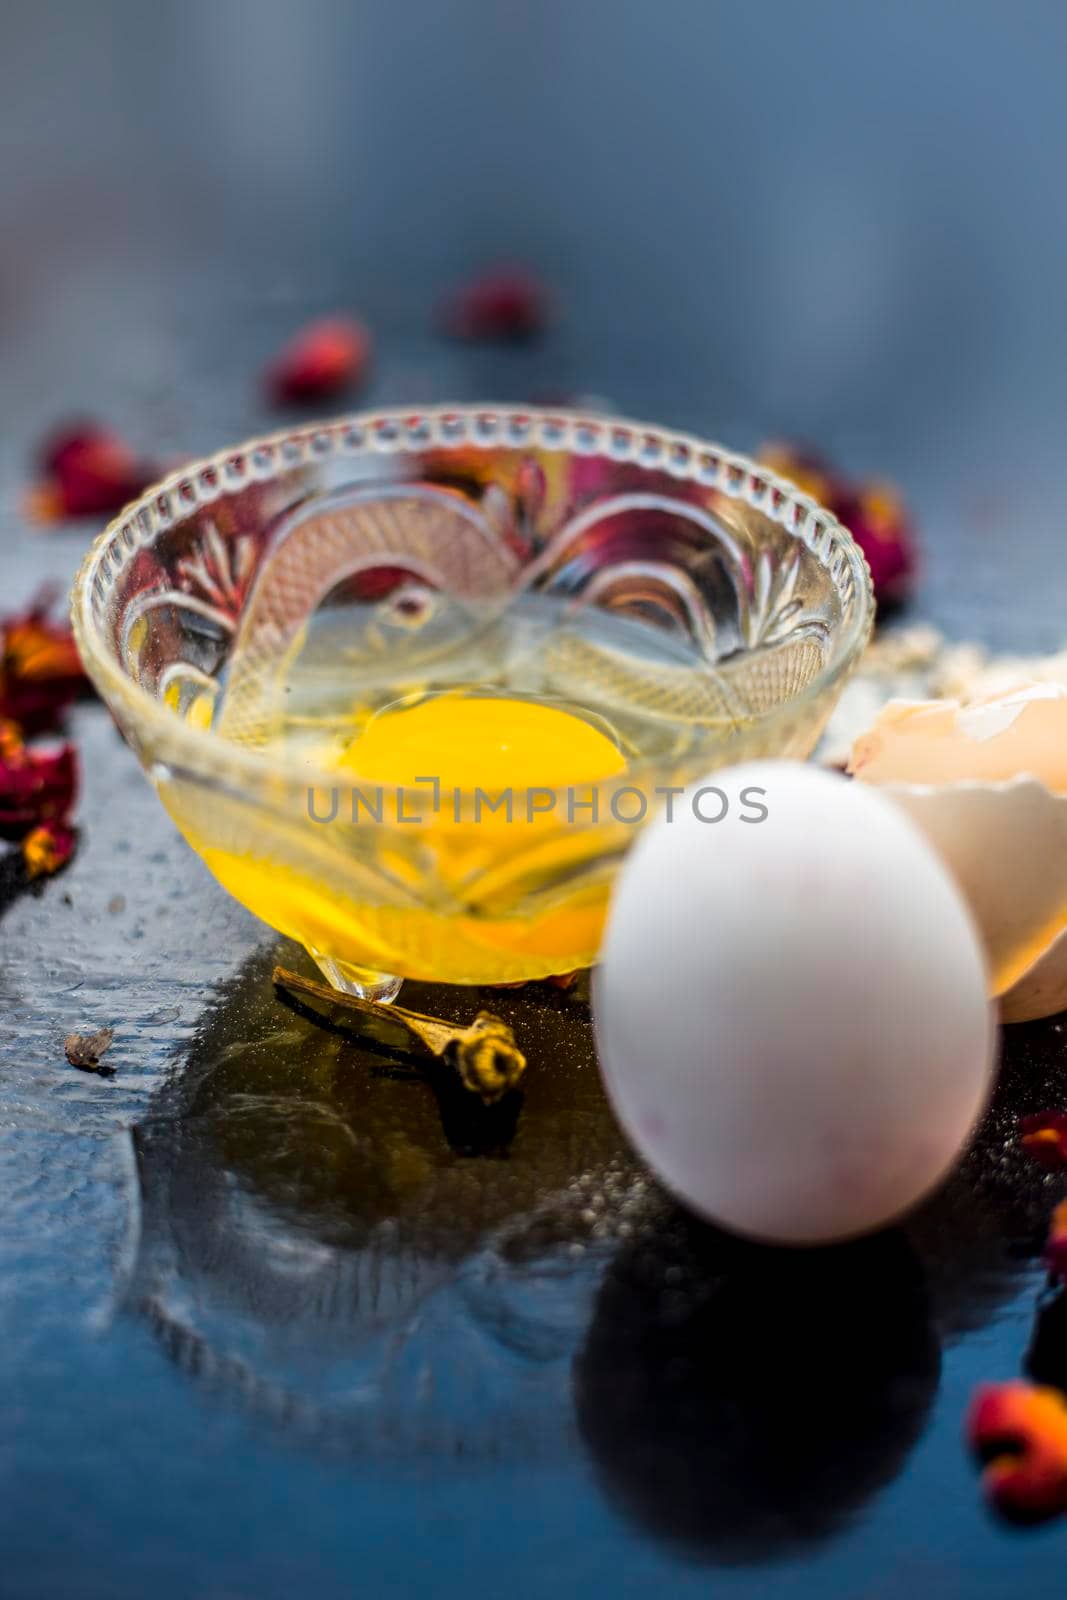 Egg and besan or chickpea flour or gram flour on wooden surface in a glass bowl along with raw egg and flour on the surface.For the treatment of lines and wrinkles. by mirzamlk